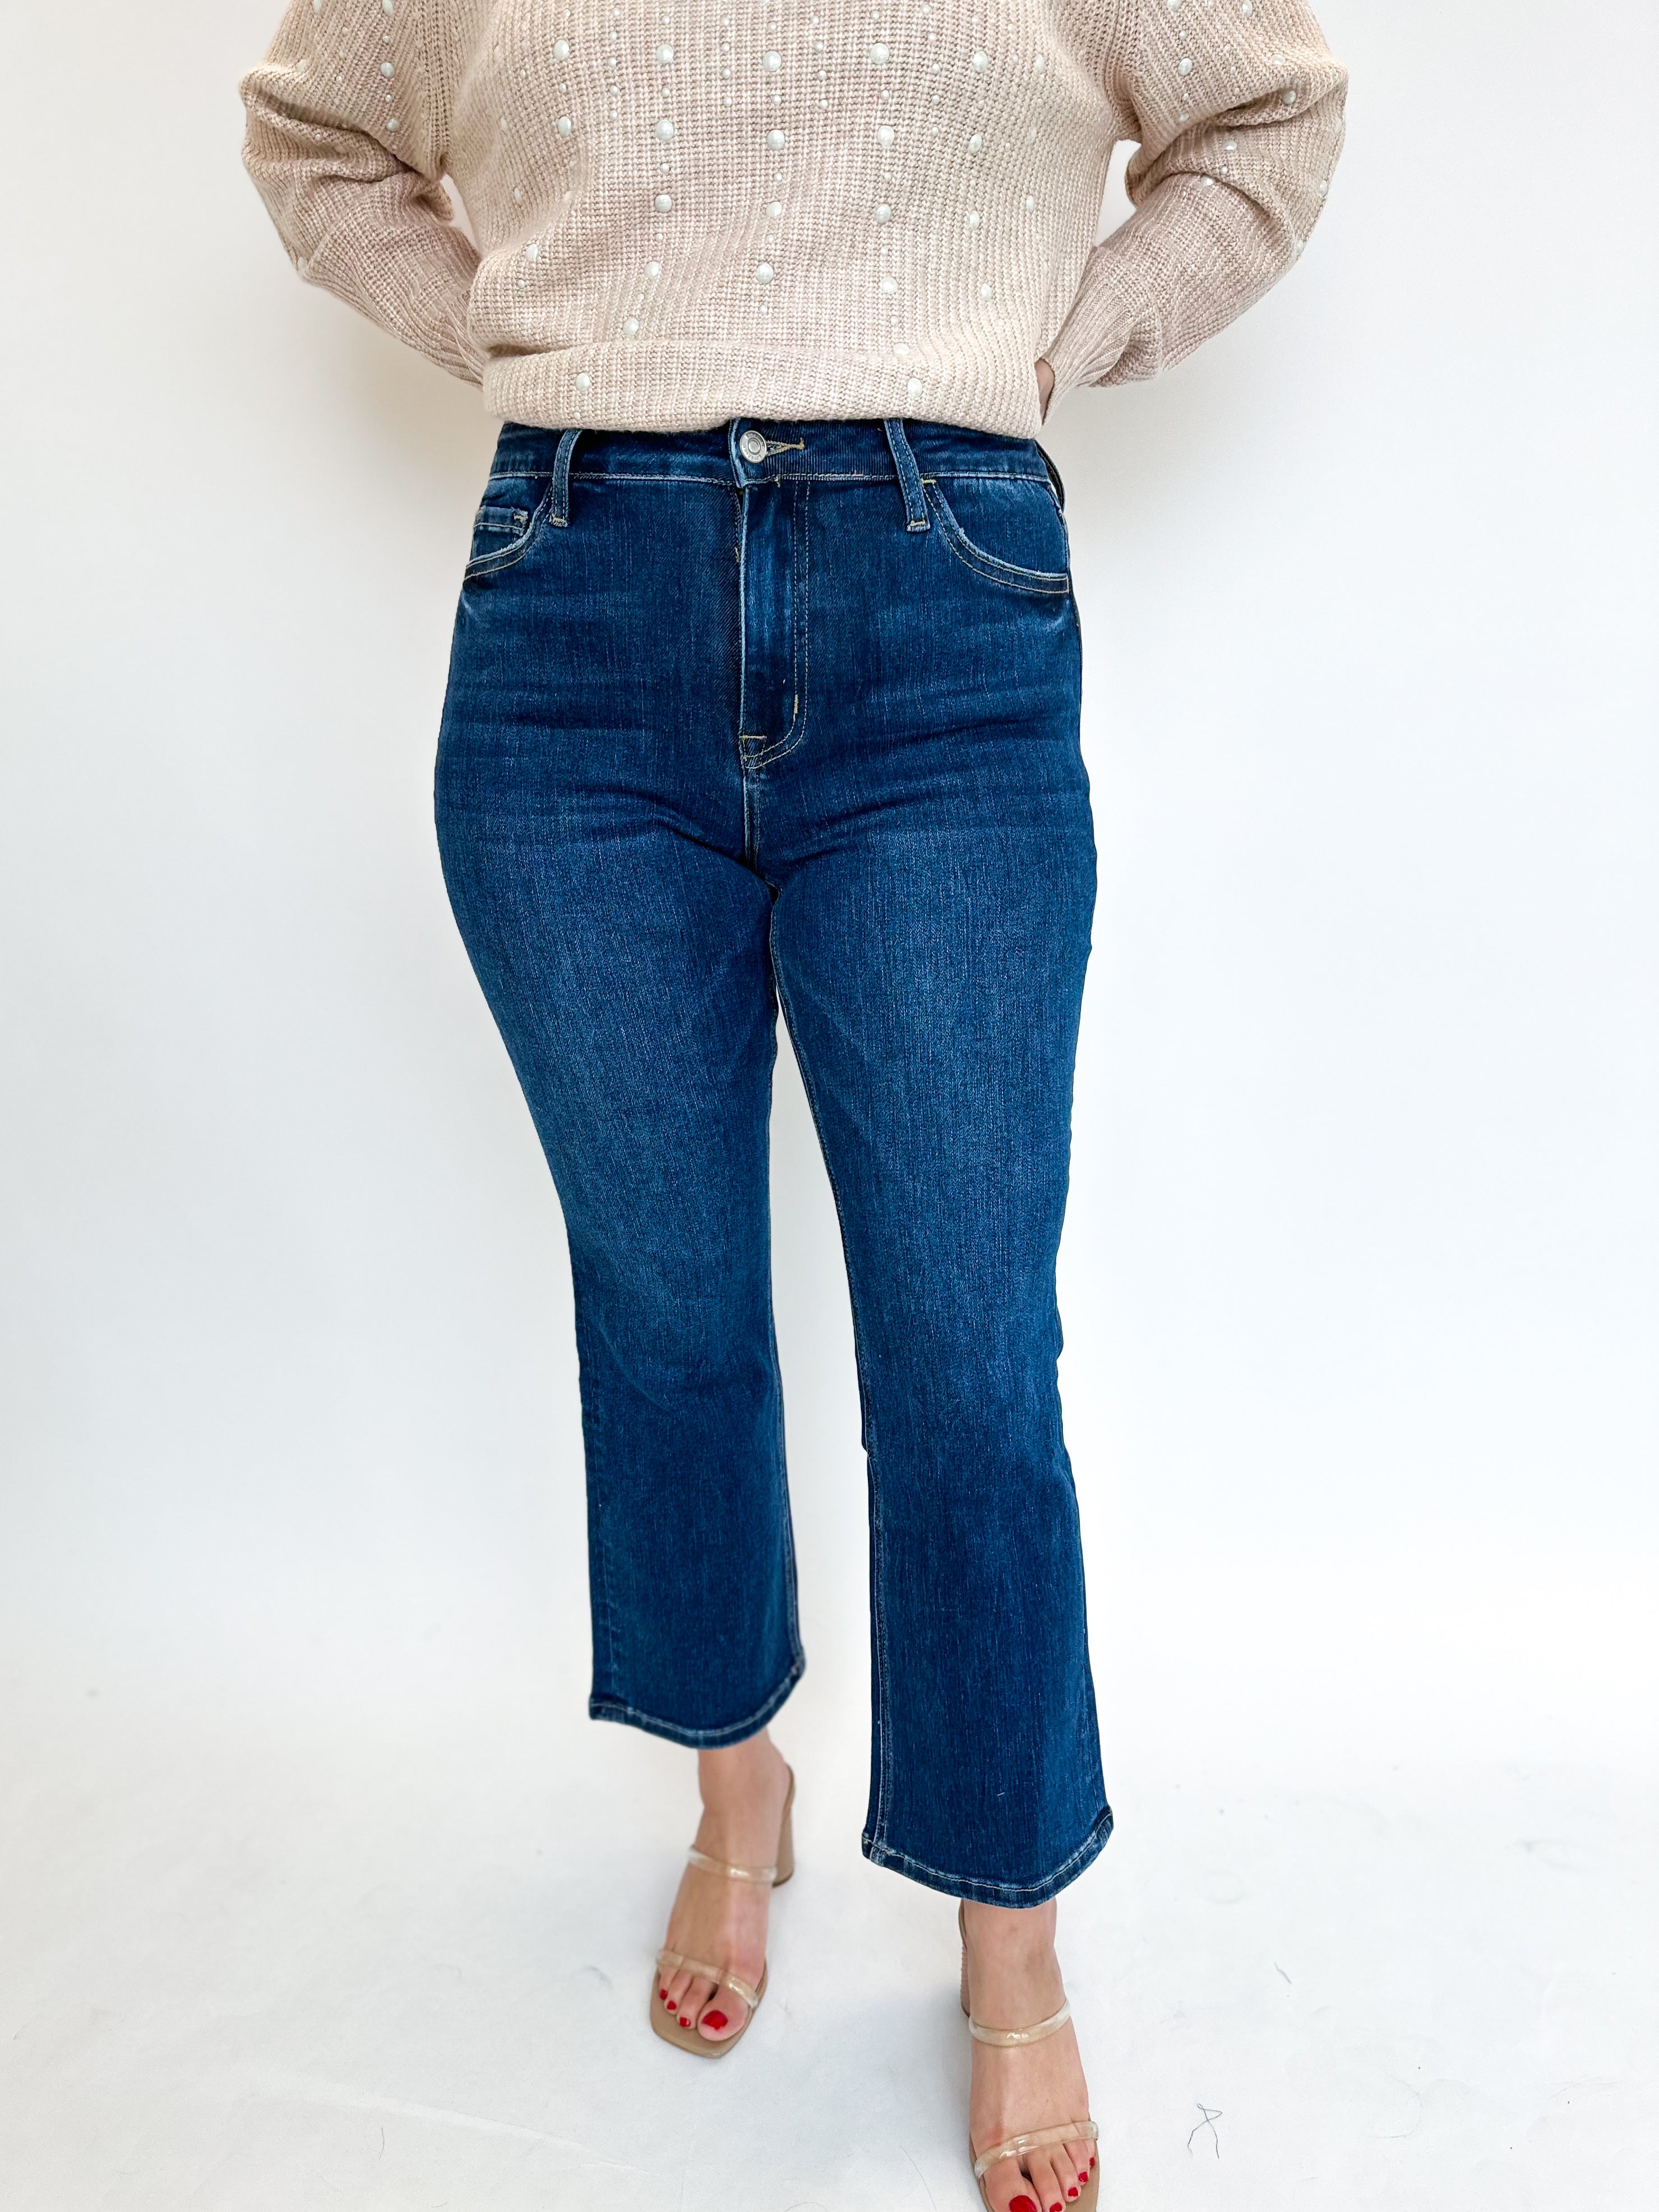 Vervet Dark Wash High Rise Kick Flare Jeans-400 Pants-VEVERT BY FLYING MONKEY-July & June Women's Fashion Boutique Located in San Antonio, Texas